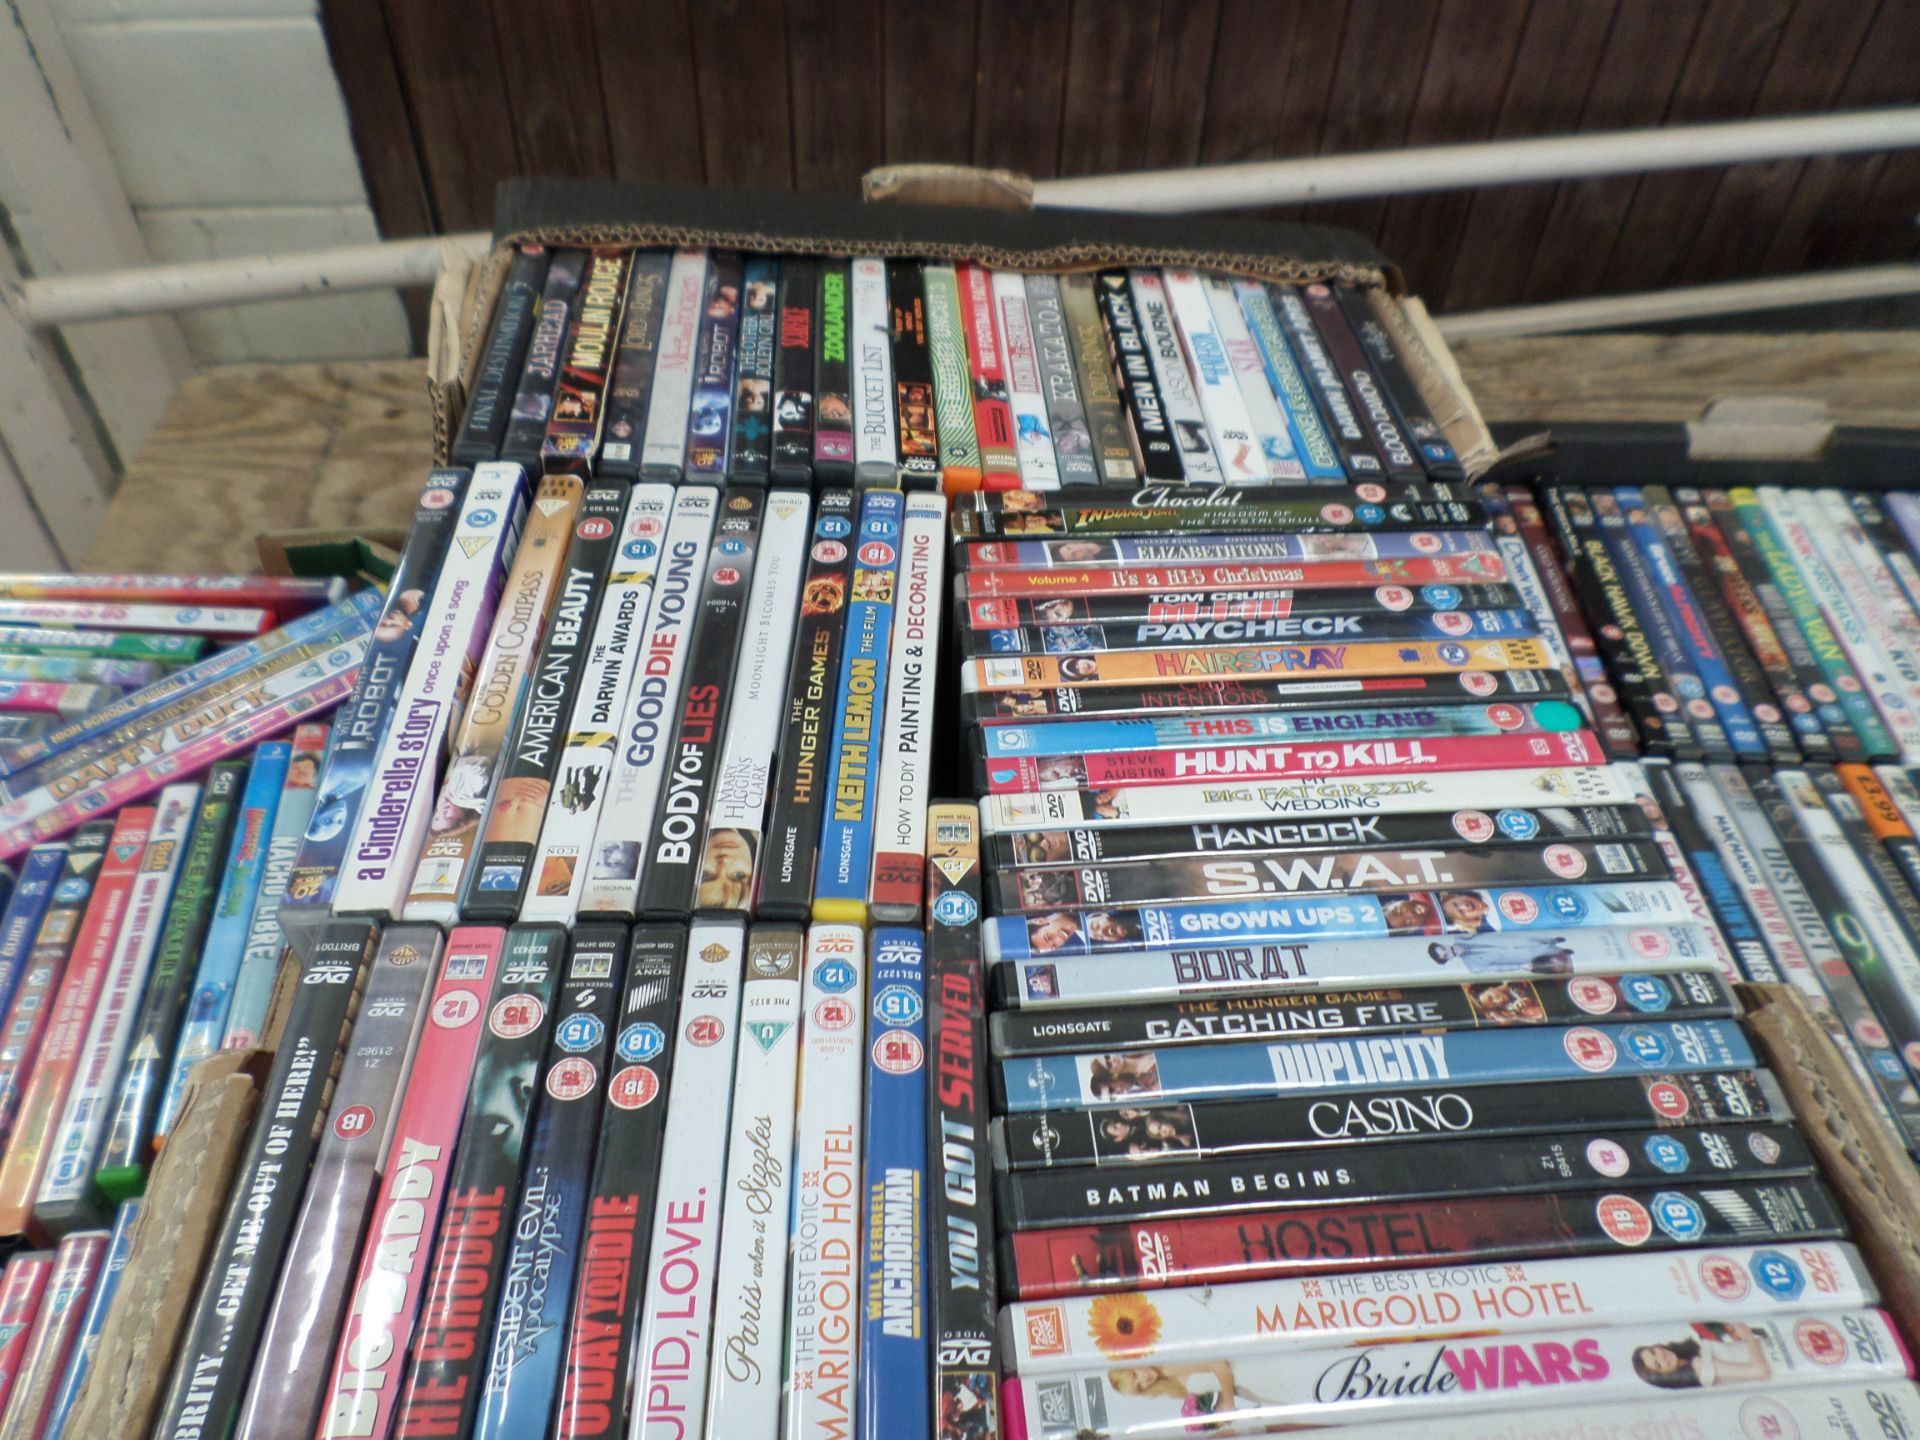 3 boxes of mixed DVDs